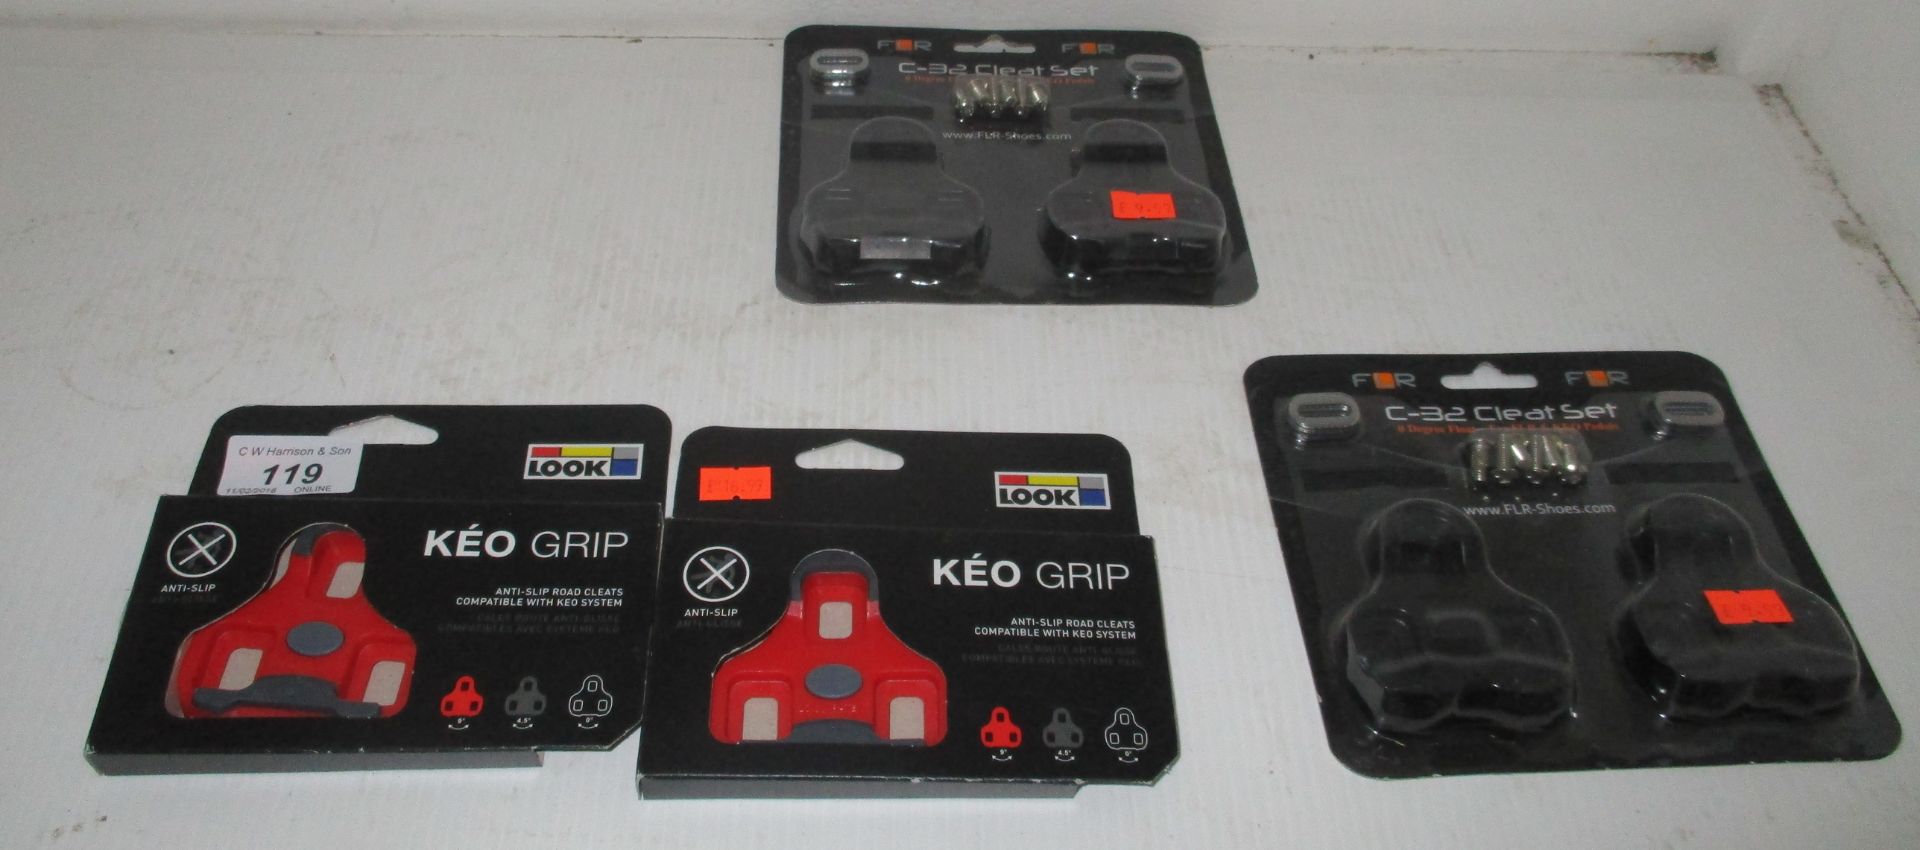 4 x items - 2 x sets of Look KEO grip anti-slip road cleats and 2 x sets of FLR C-32 cleats